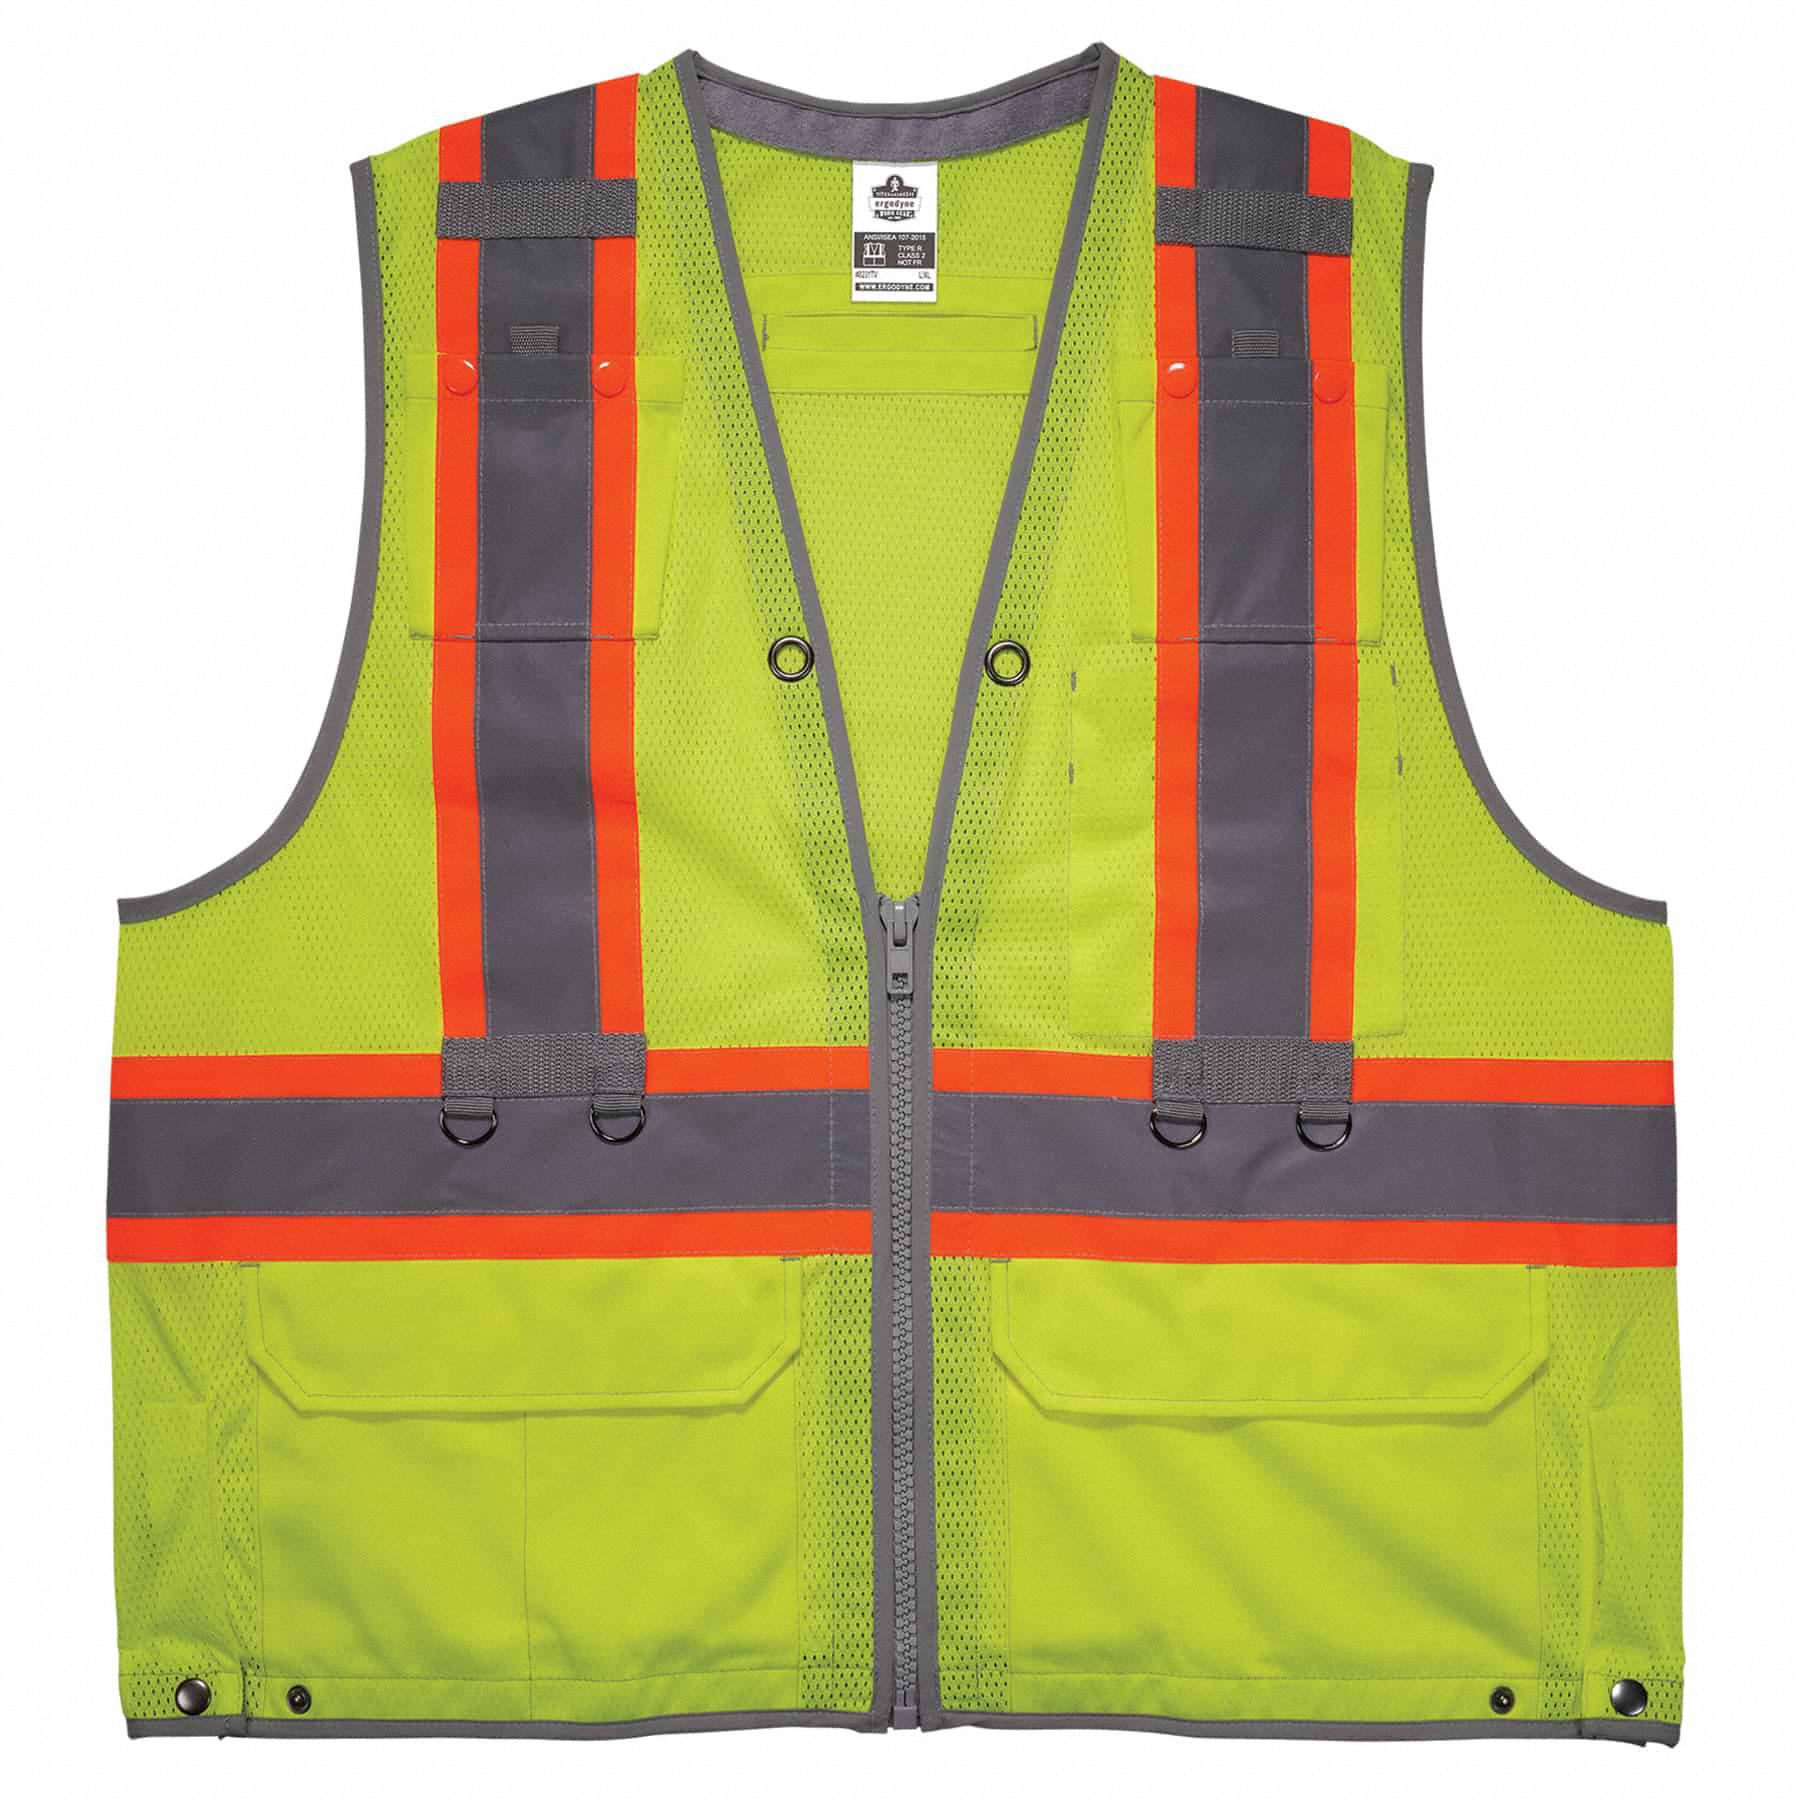 Tool Tethering Safety Vest: ANSI Class 2, U, S/M, Lime, Mesh Polyester, Zipper